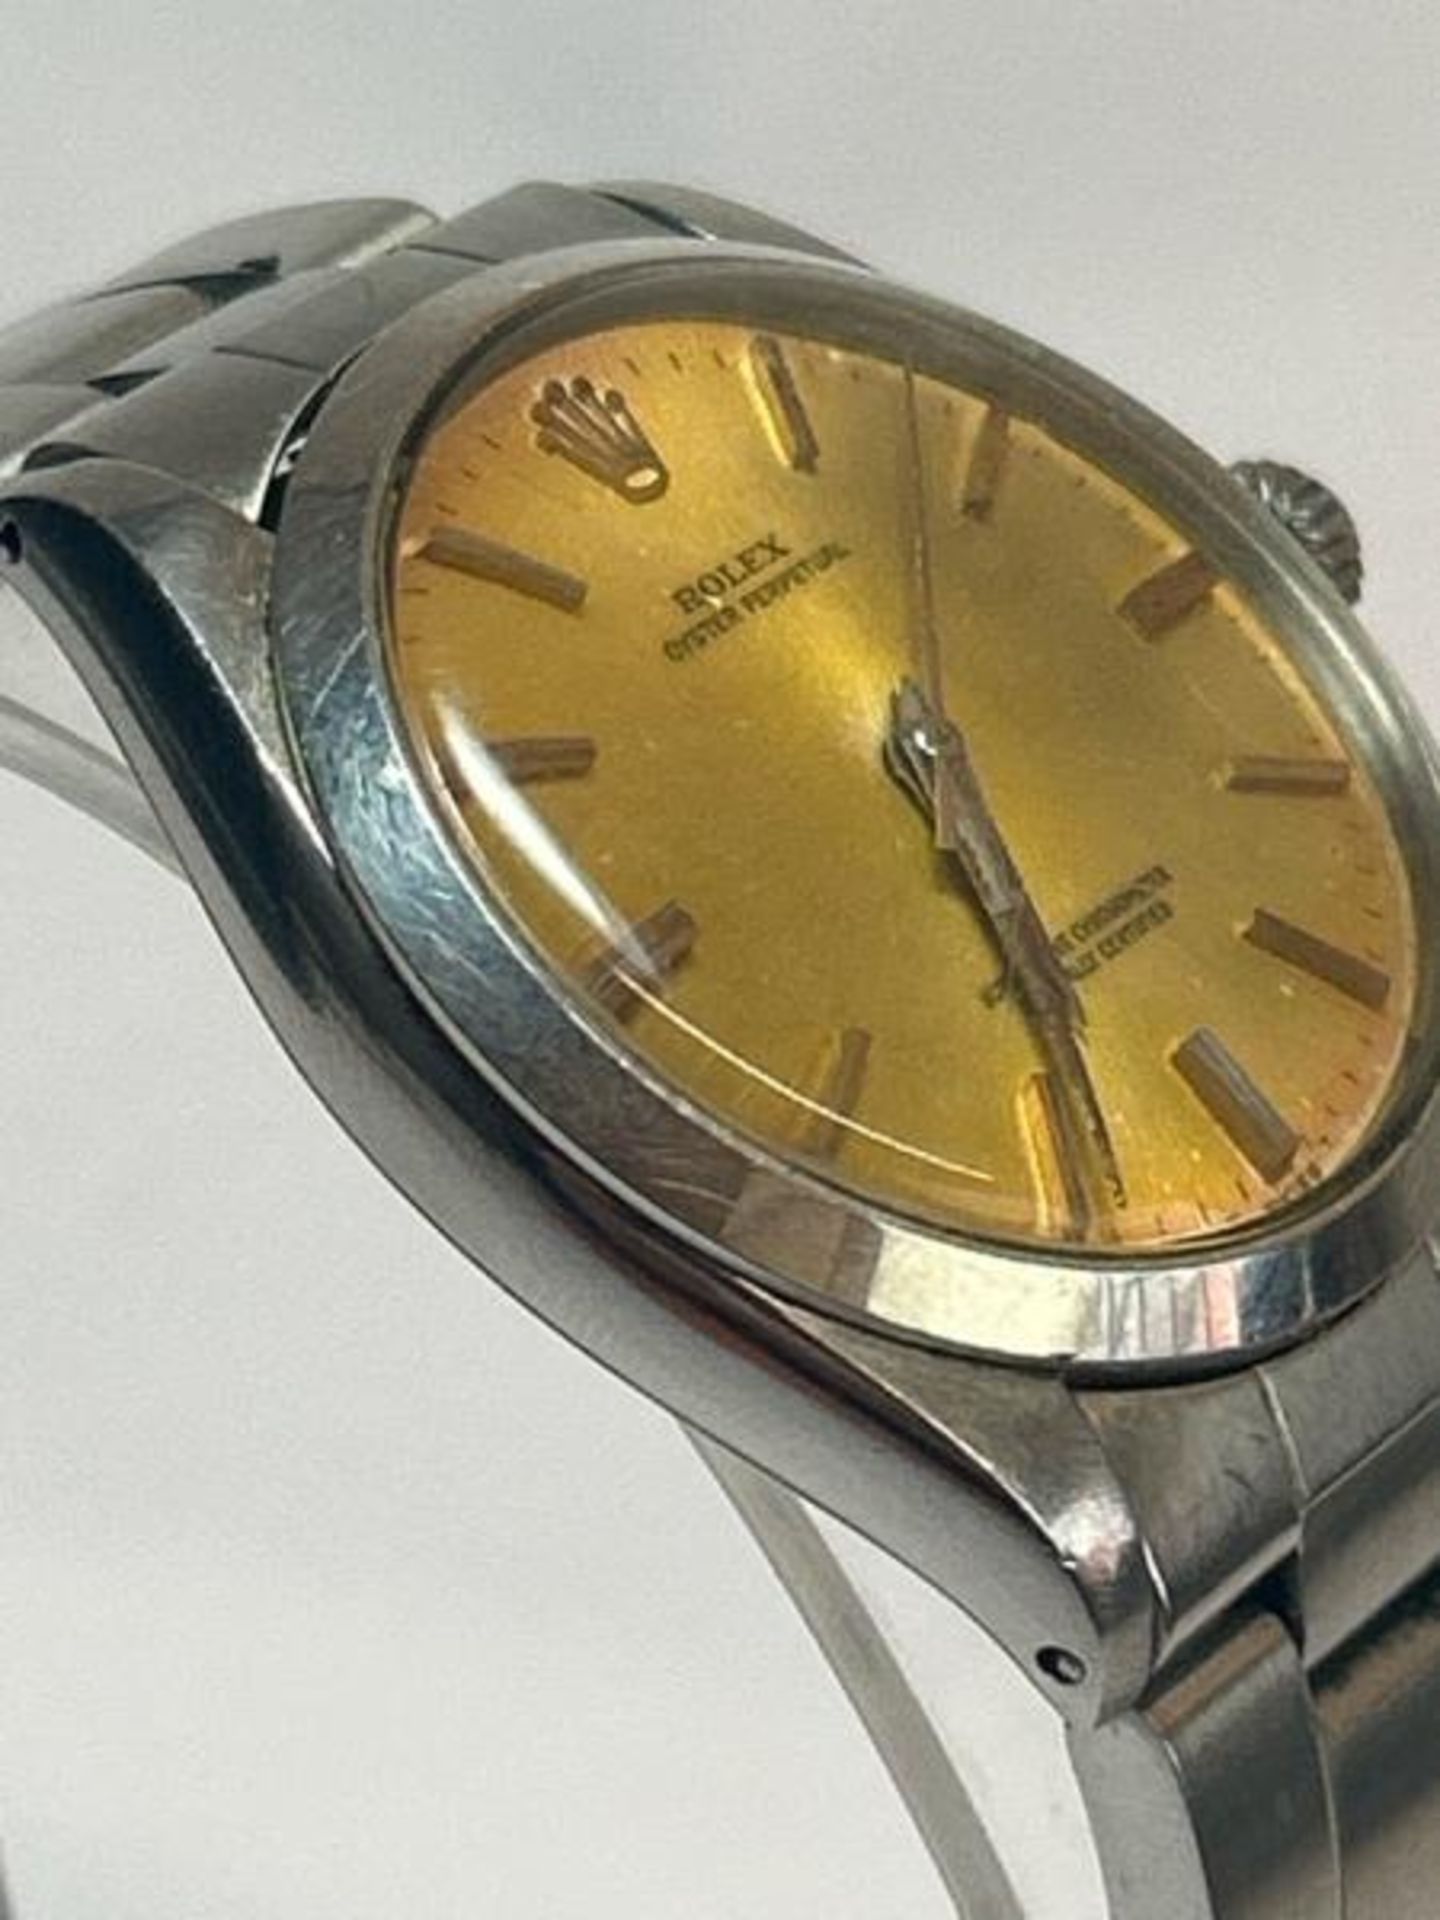 Gents vintage 1965 Rolex Oyster, perpetual superlature chronometer watch with champagne dial and - Bild 3 aus 11